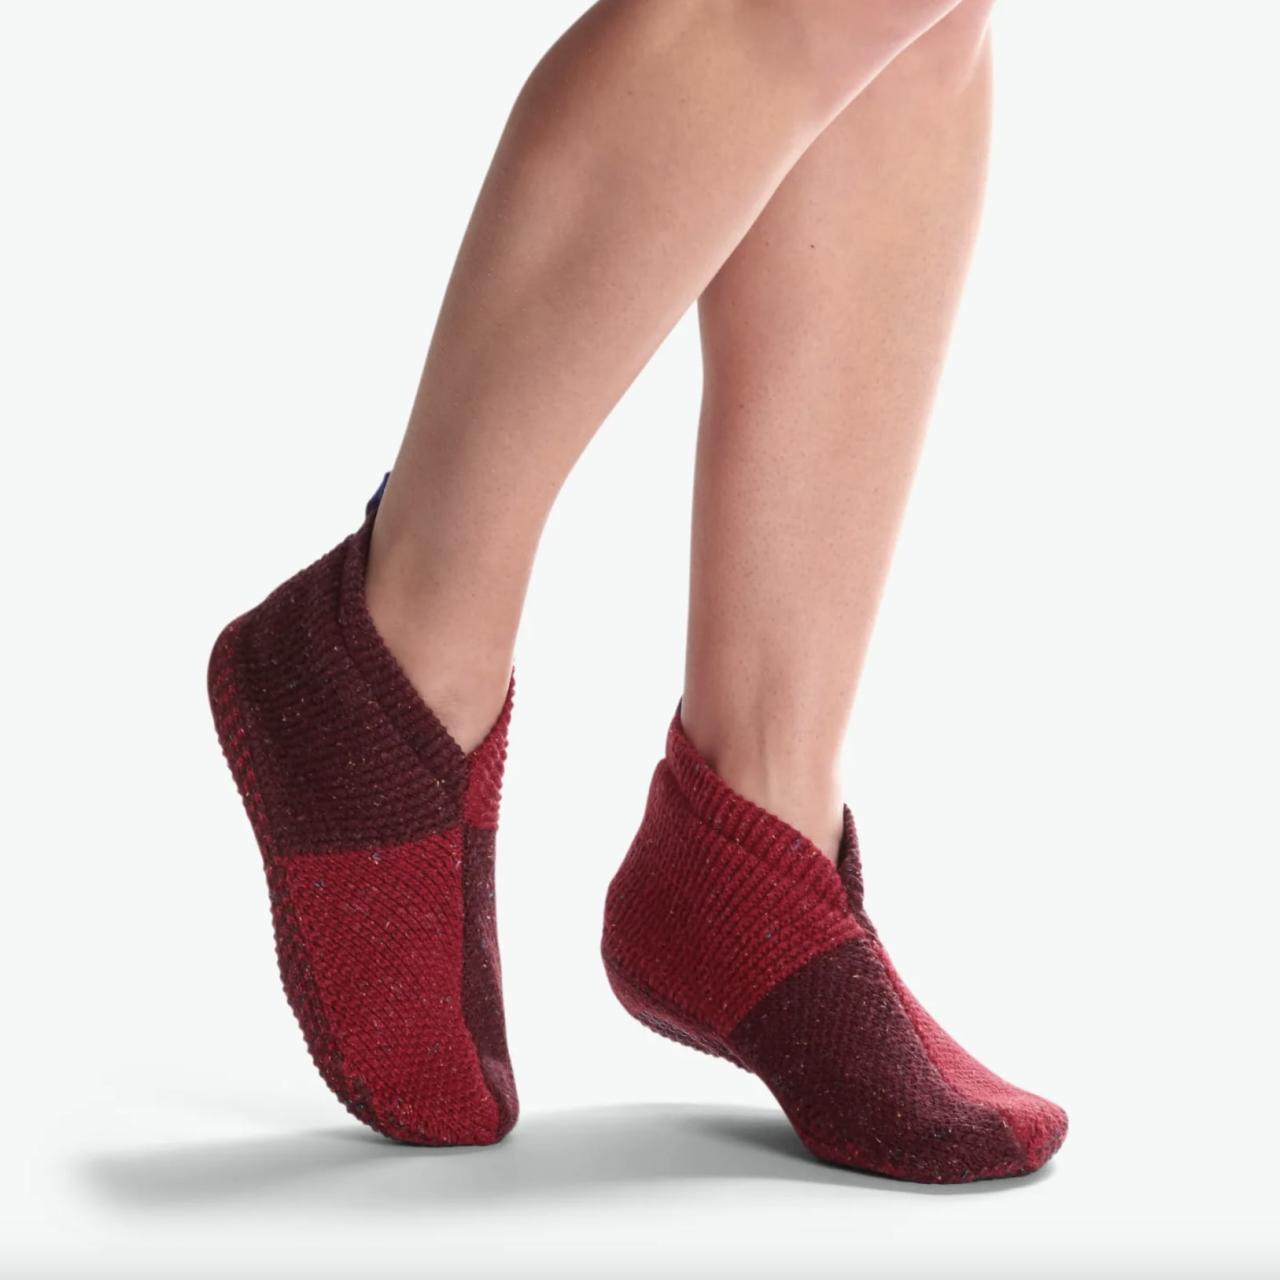 HOT* 50% Off Bombas Gripper Slippers + Free Shipping!